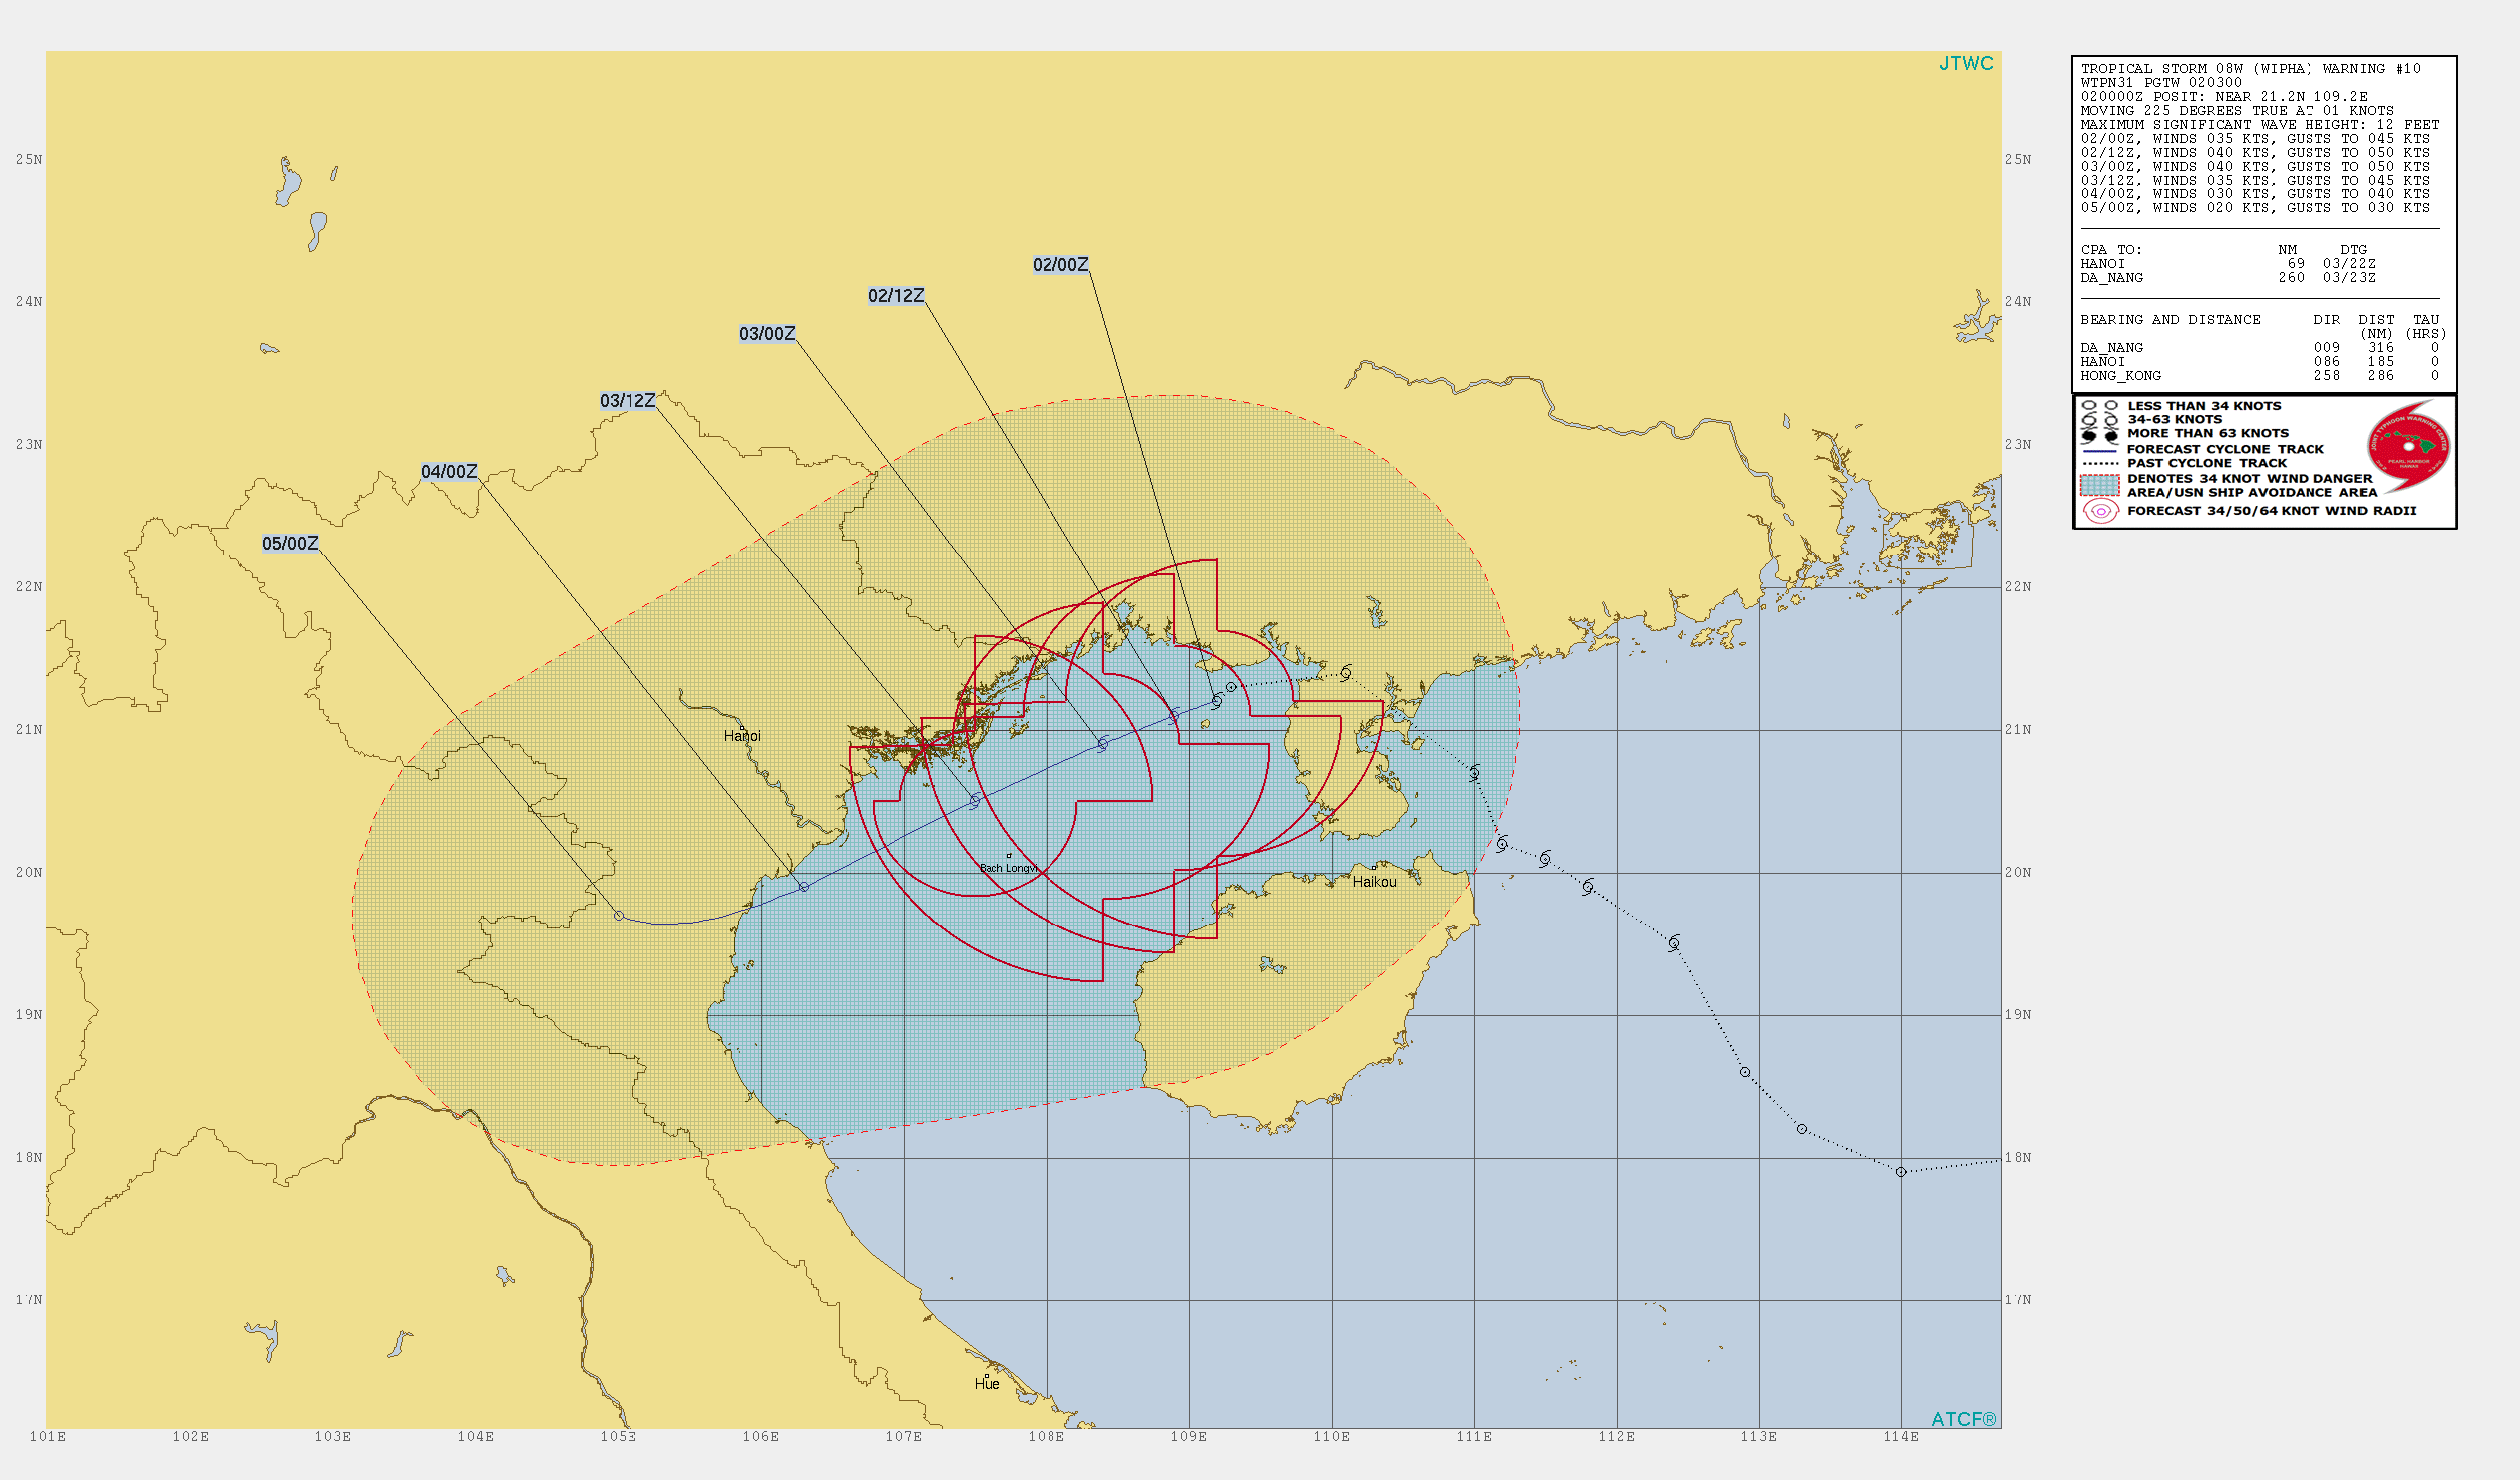 WIPHA(08W): WARNING 10. PEAK INTENSITY OF 40KNOTS FORECAST WITHIN 24HOURS.